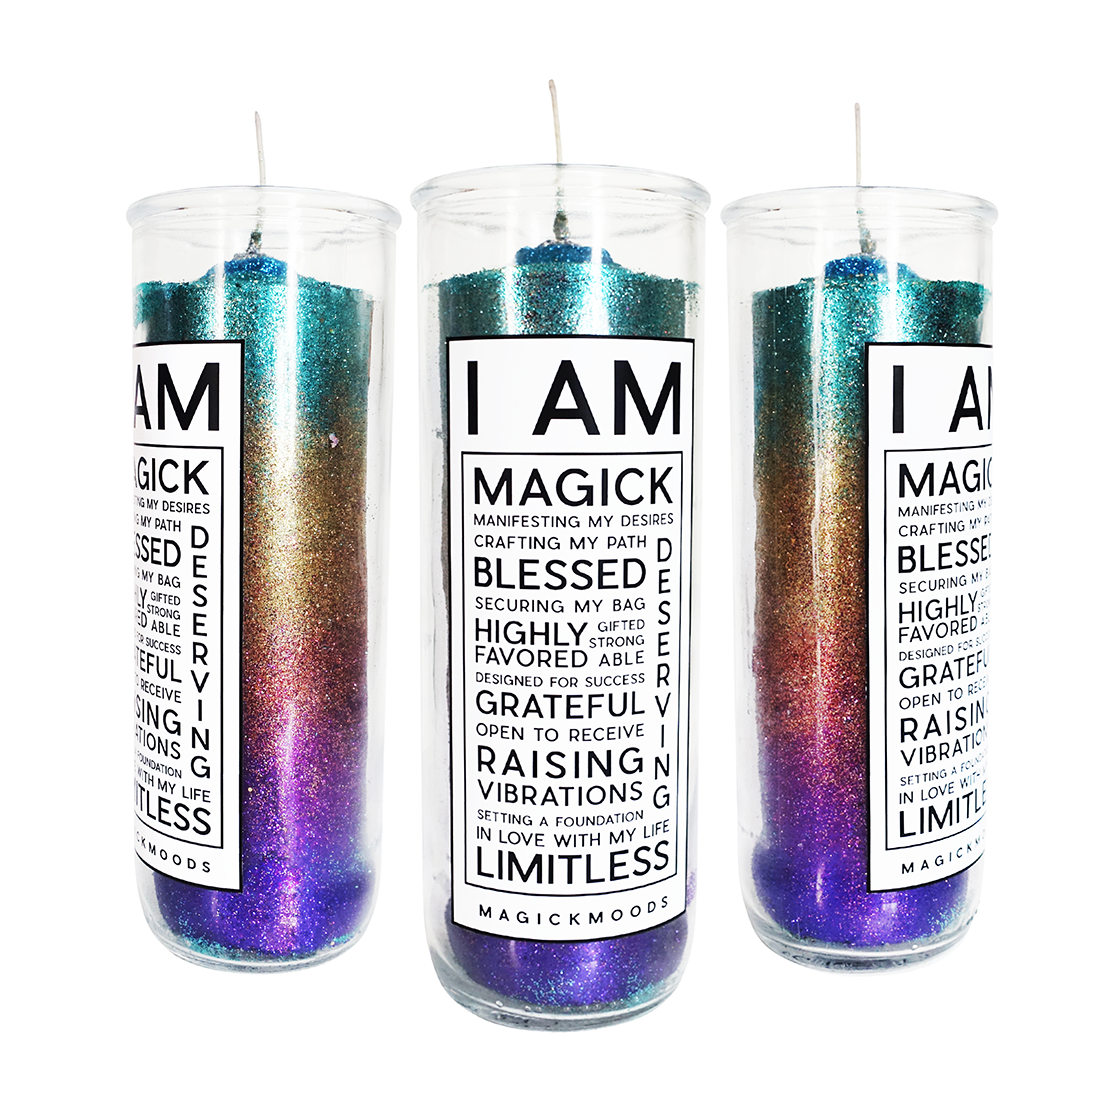 I Am Magick 7-Day Meditation Candle - PREORDER - Ships by July 28th, 2023